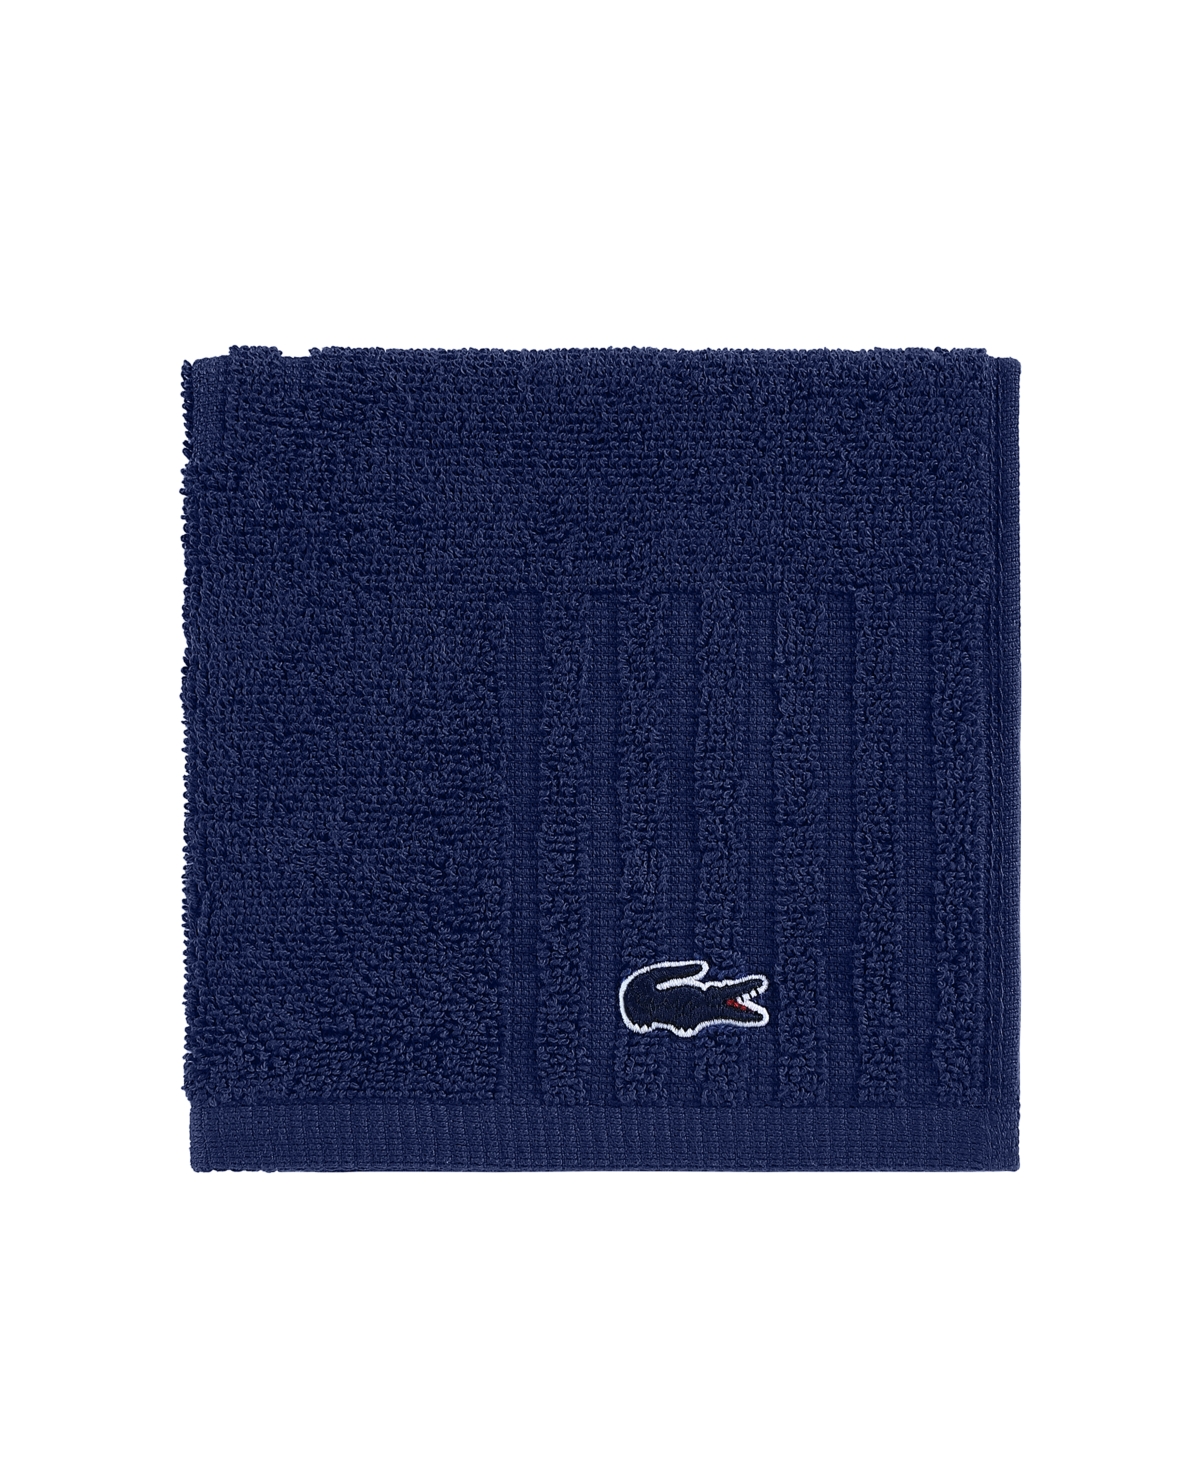 Lacoste Home Lacoste Sculpted Radius Wash Cloth Bedding In Oxford Blue ...